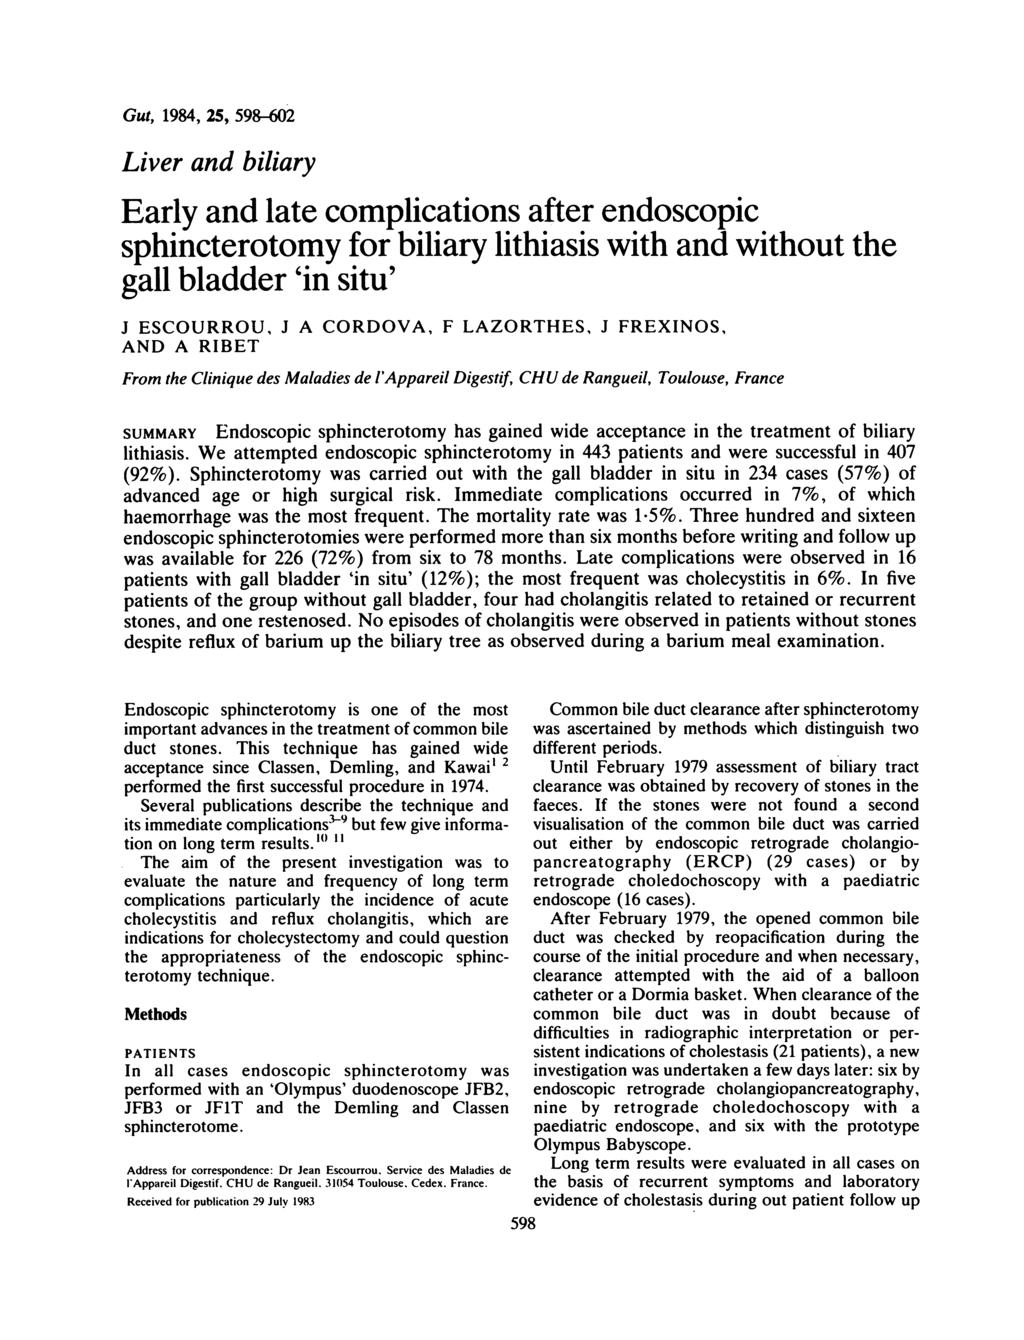 Gut, 1984, 25, 598-02 Liver and biliary Early and late complications after endoscopic sphincterotomy for biliary lithiasis with and without the gall bladder 'in situ' J ESCOURROU, J A CORDOVA, F